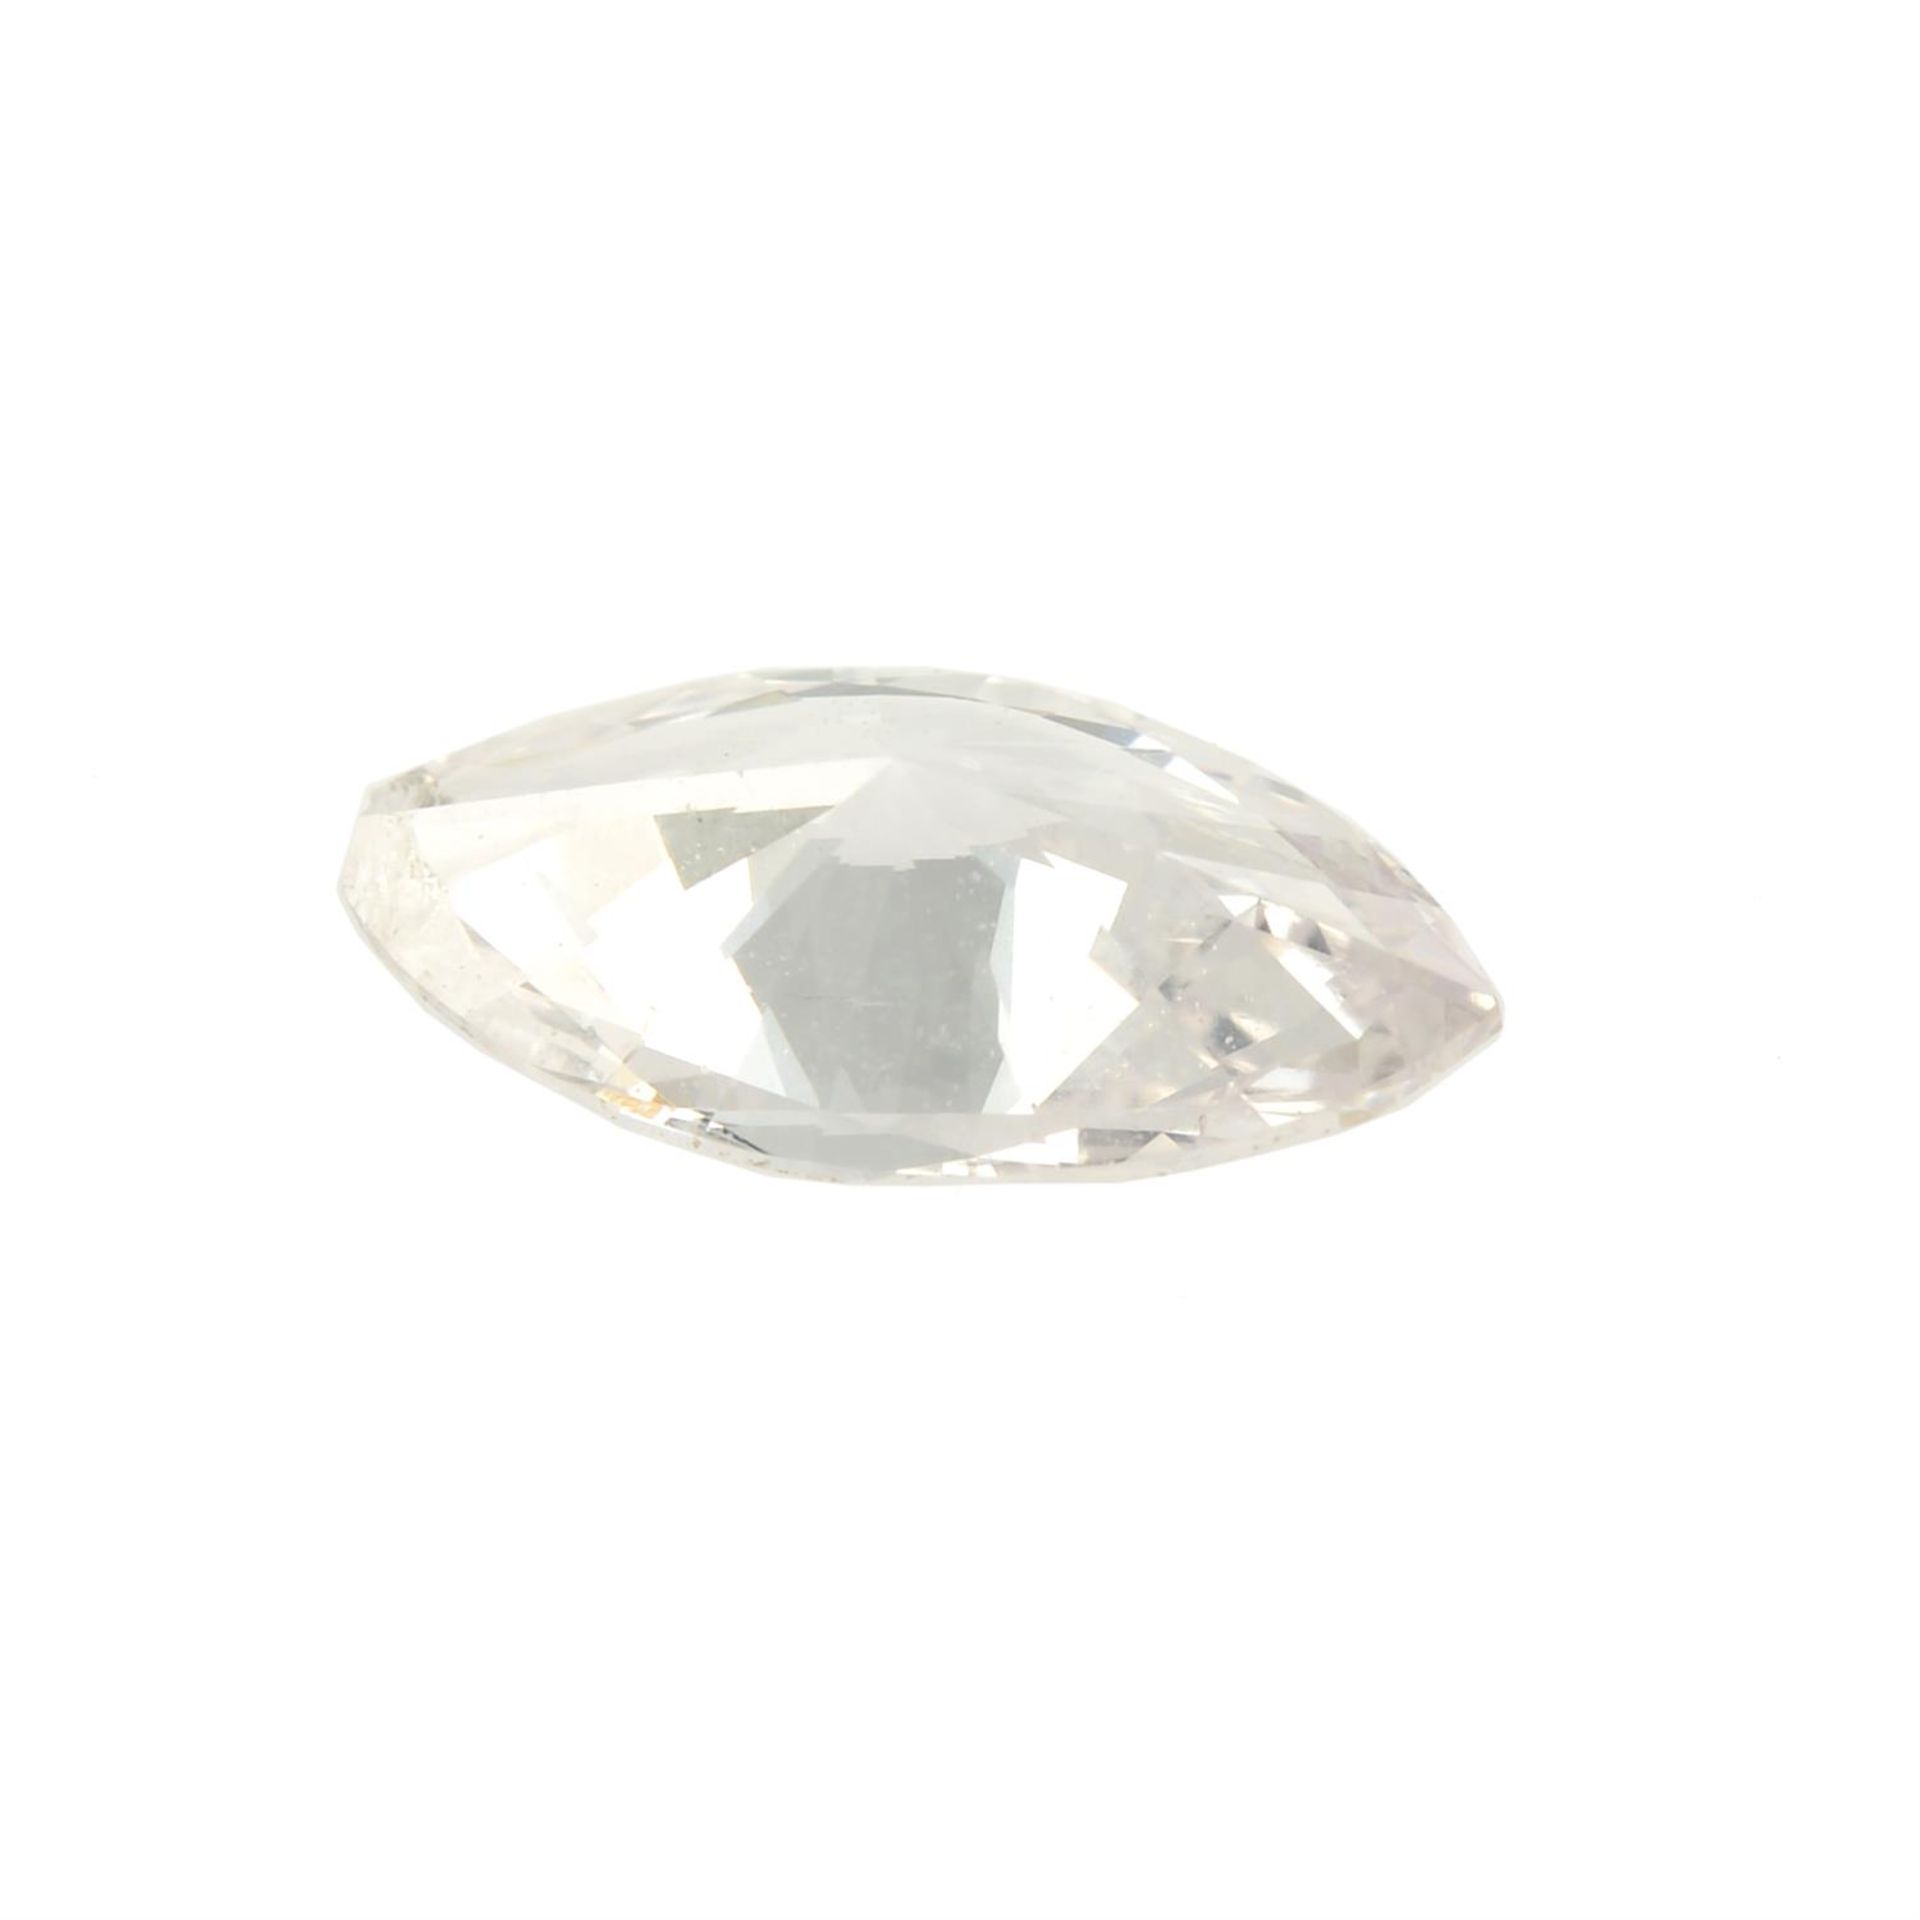 A marquise-shape 'pink' diamond, weight 0.30ct. - Image 2 of 2